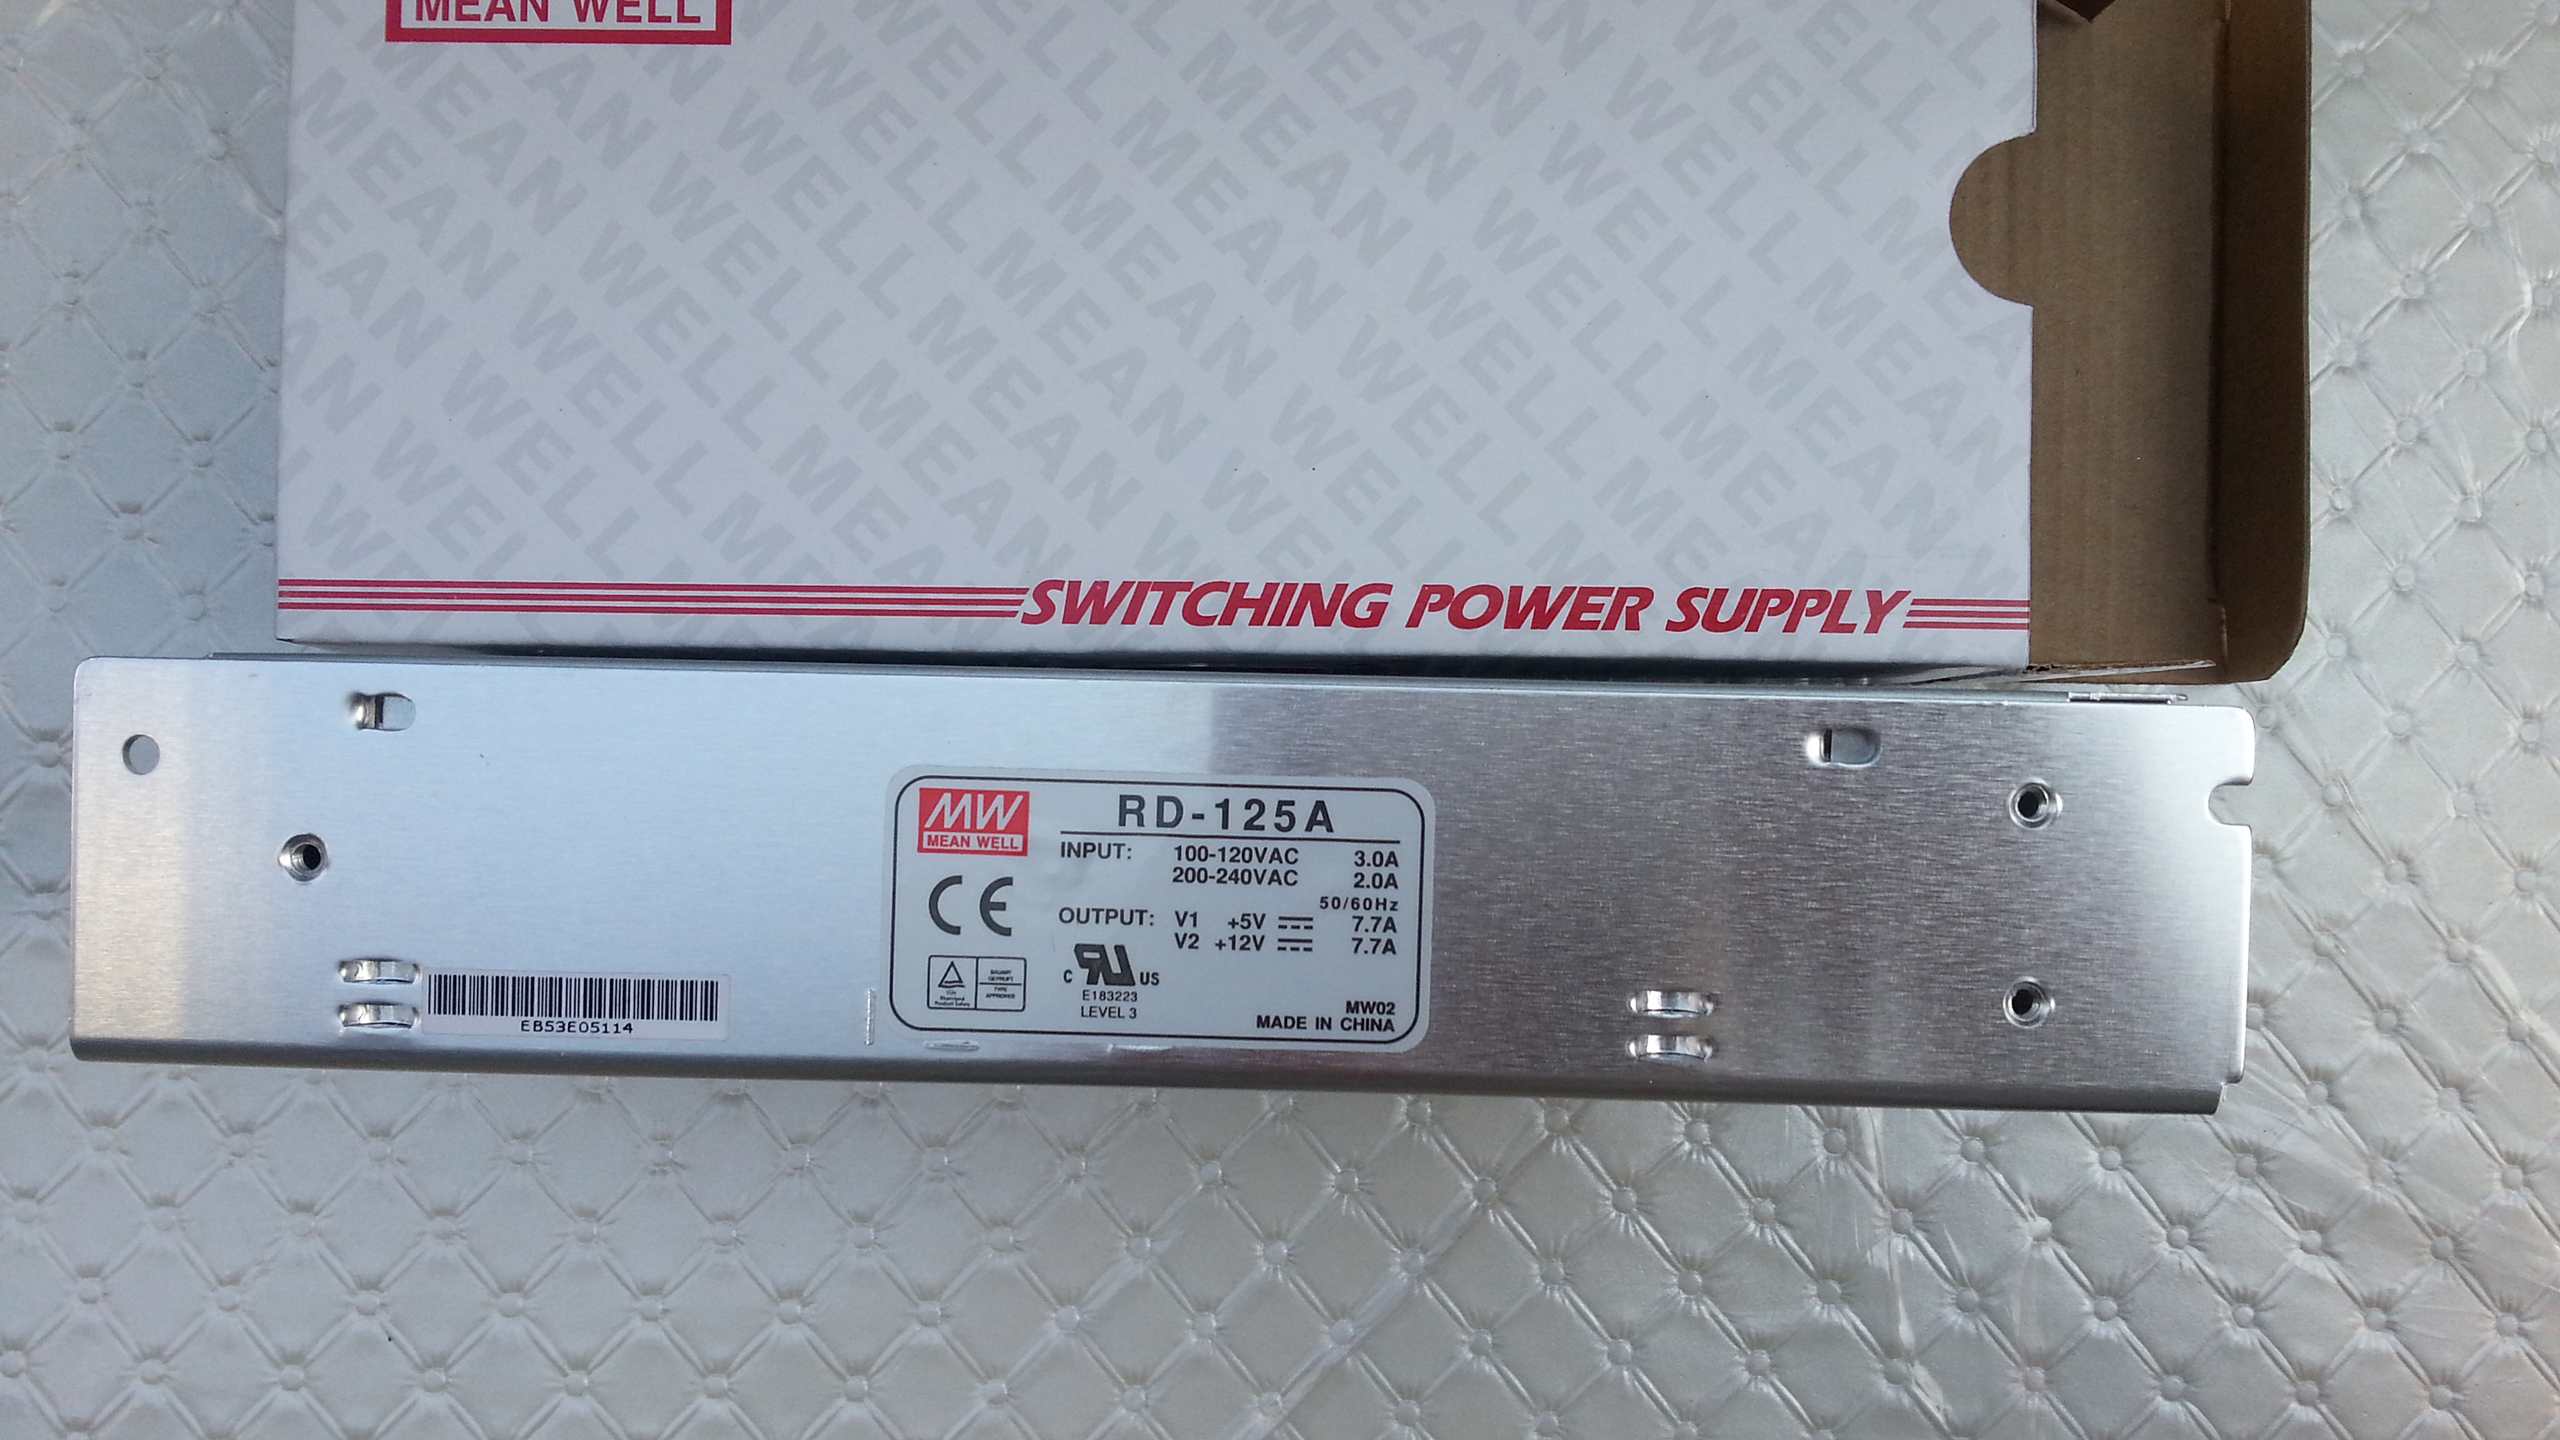 Meanwell_RD_125A_switching_power_supply